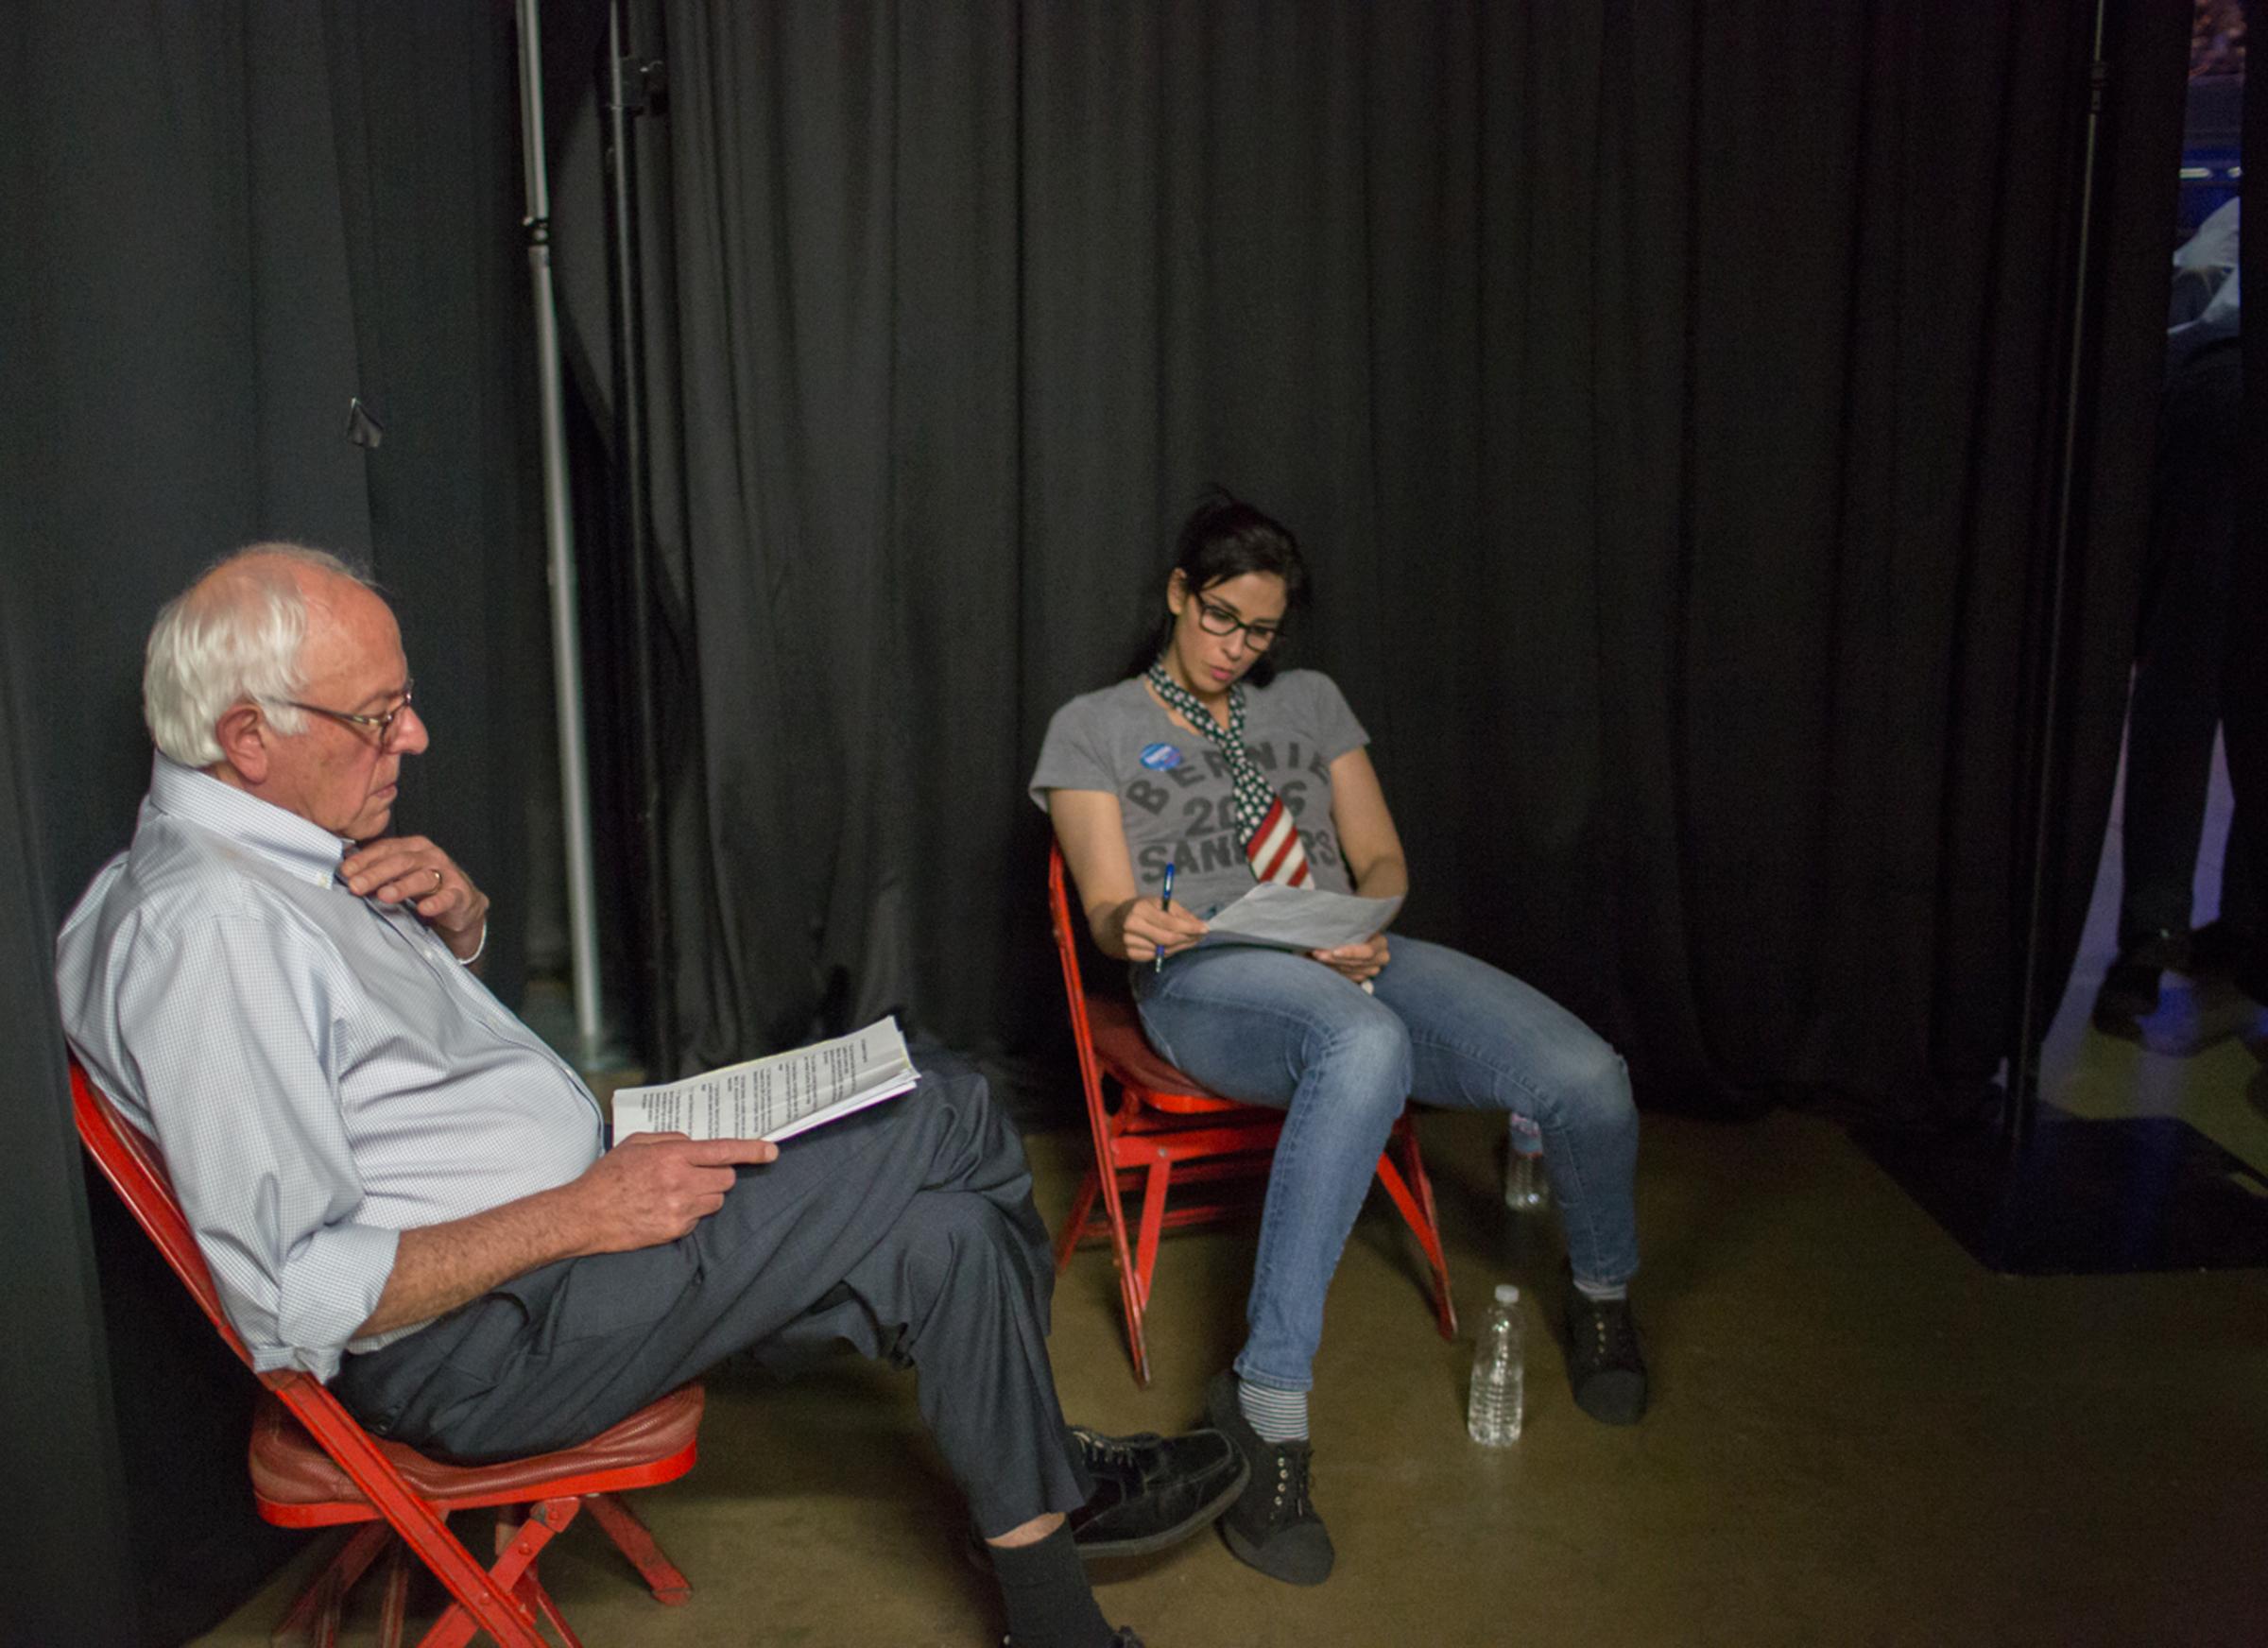 Senator Bernie Sanders and actress/comedian Sarah Silverman work backstage ahead of a rally in Los Angeles, CA, on August 10th, 2015.